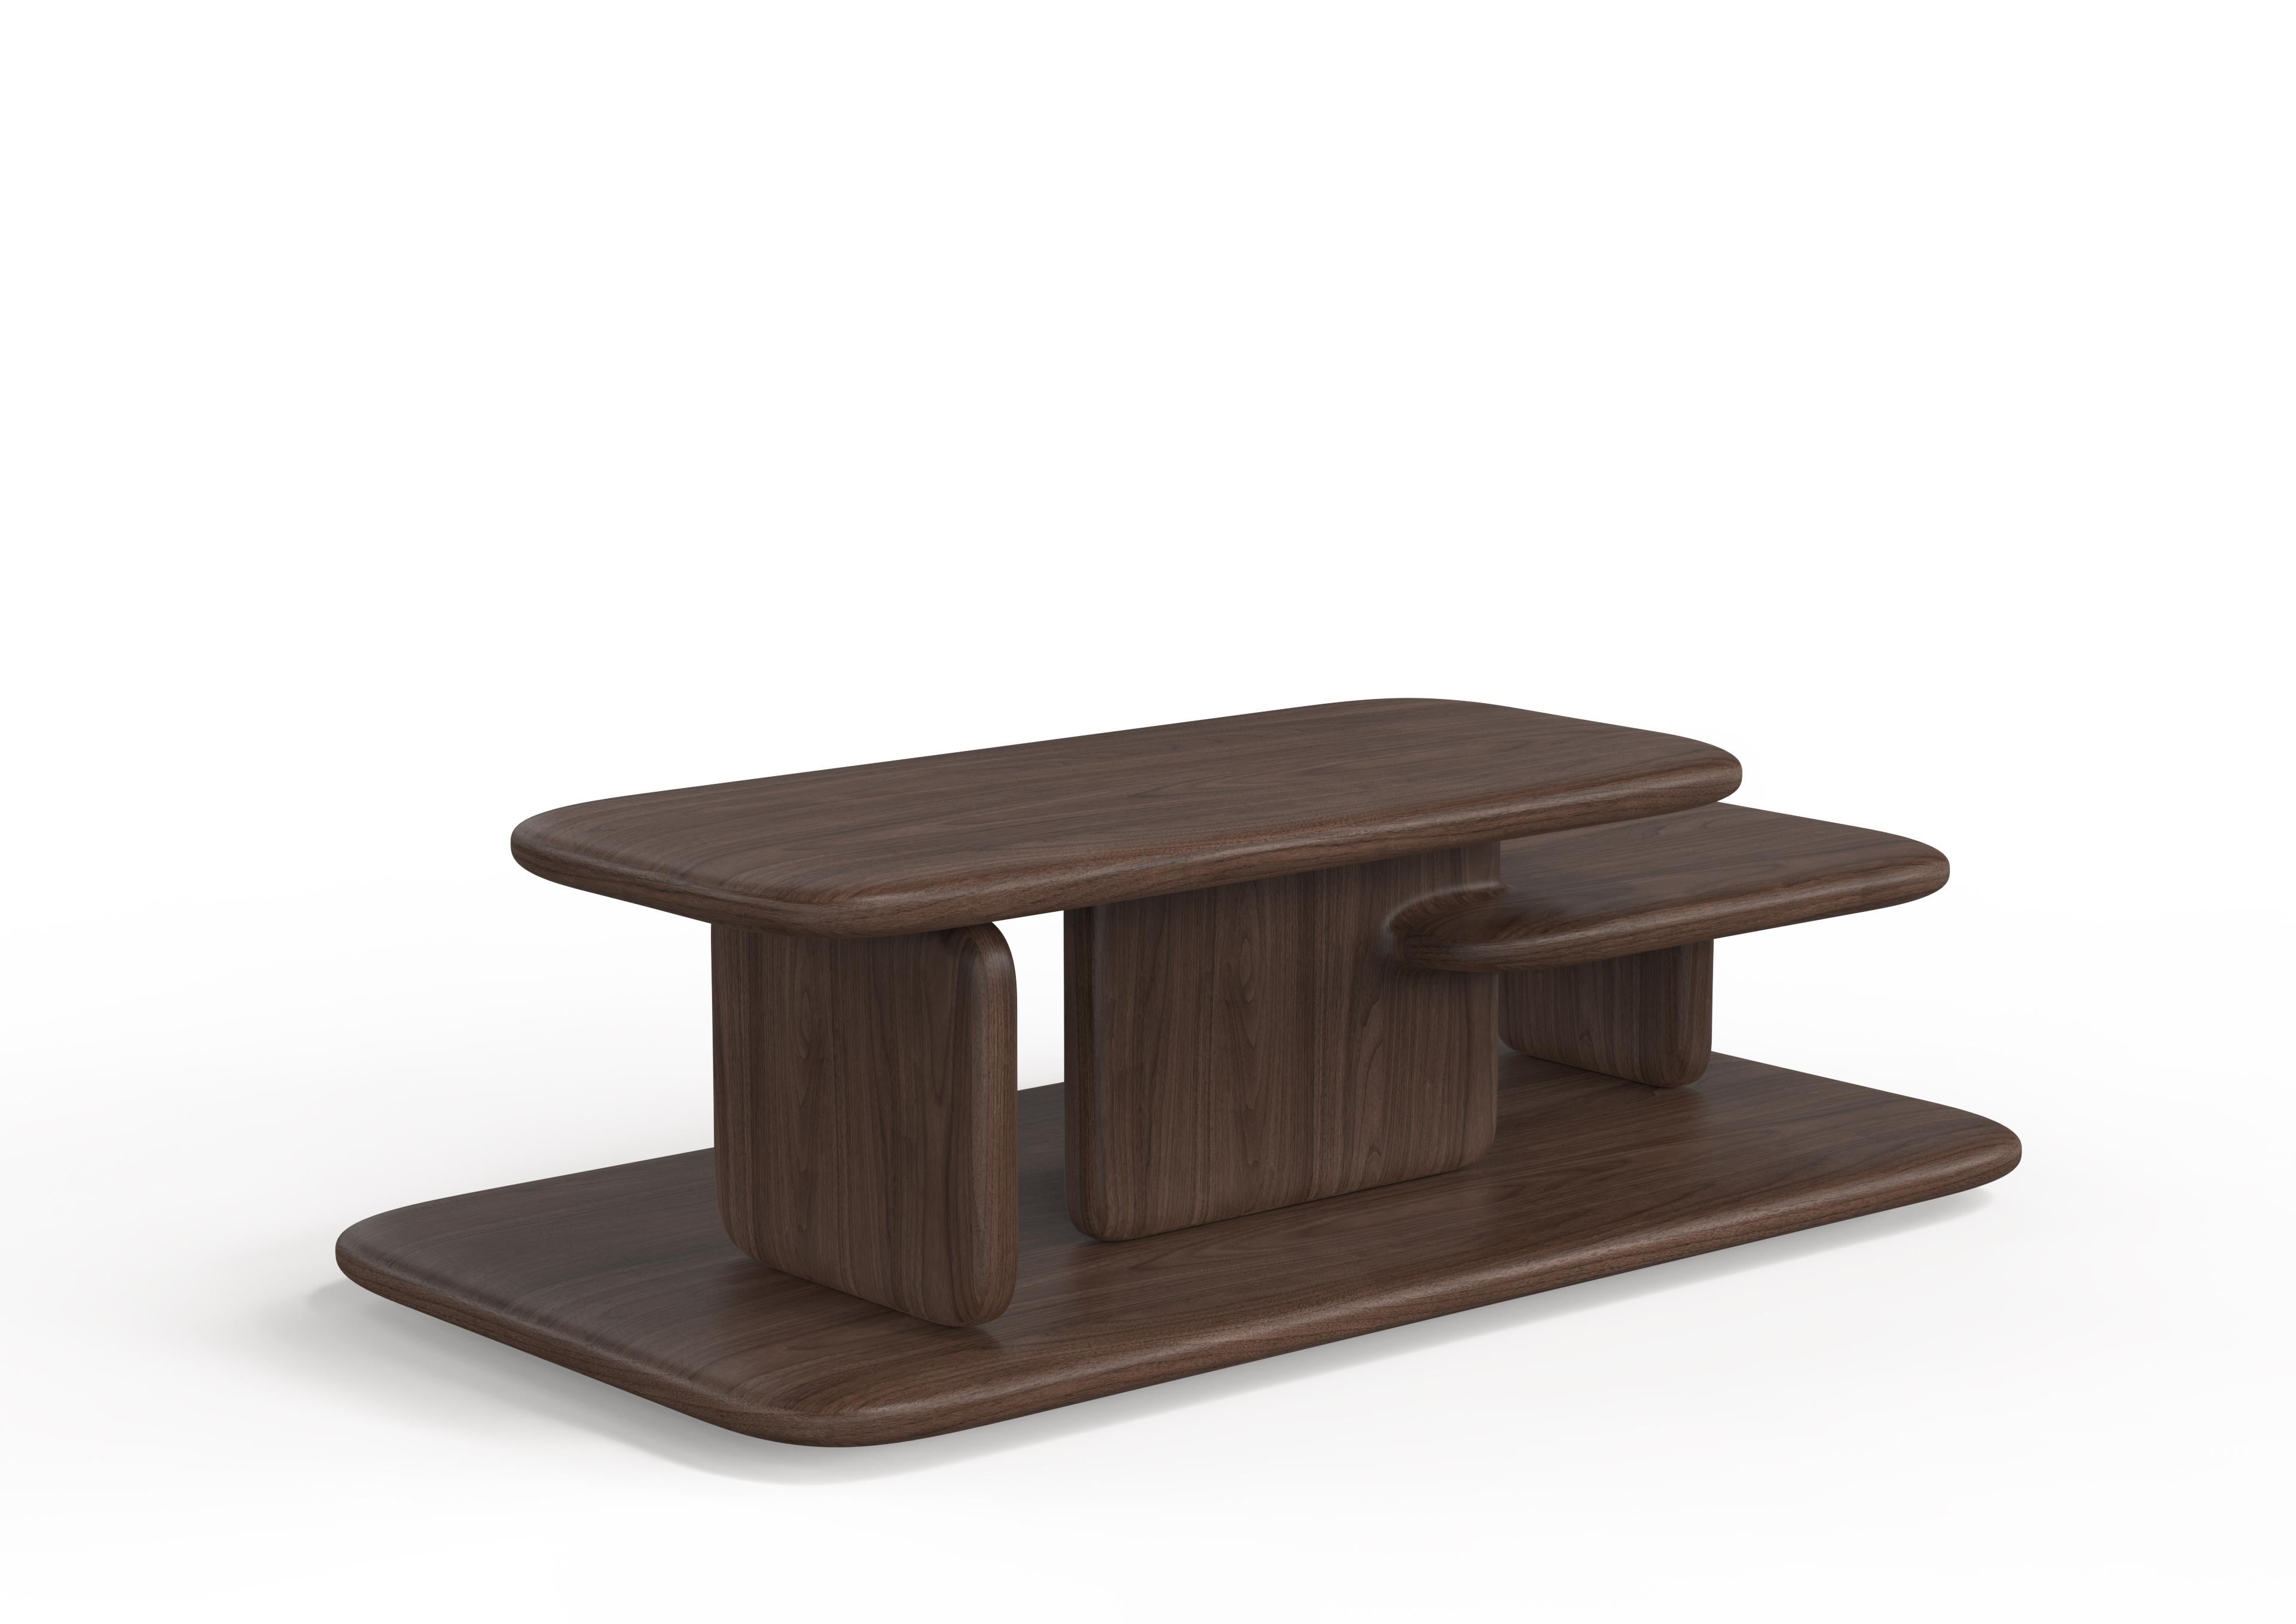 Portuguese Modern Plana Center Table in Walnut For Sale